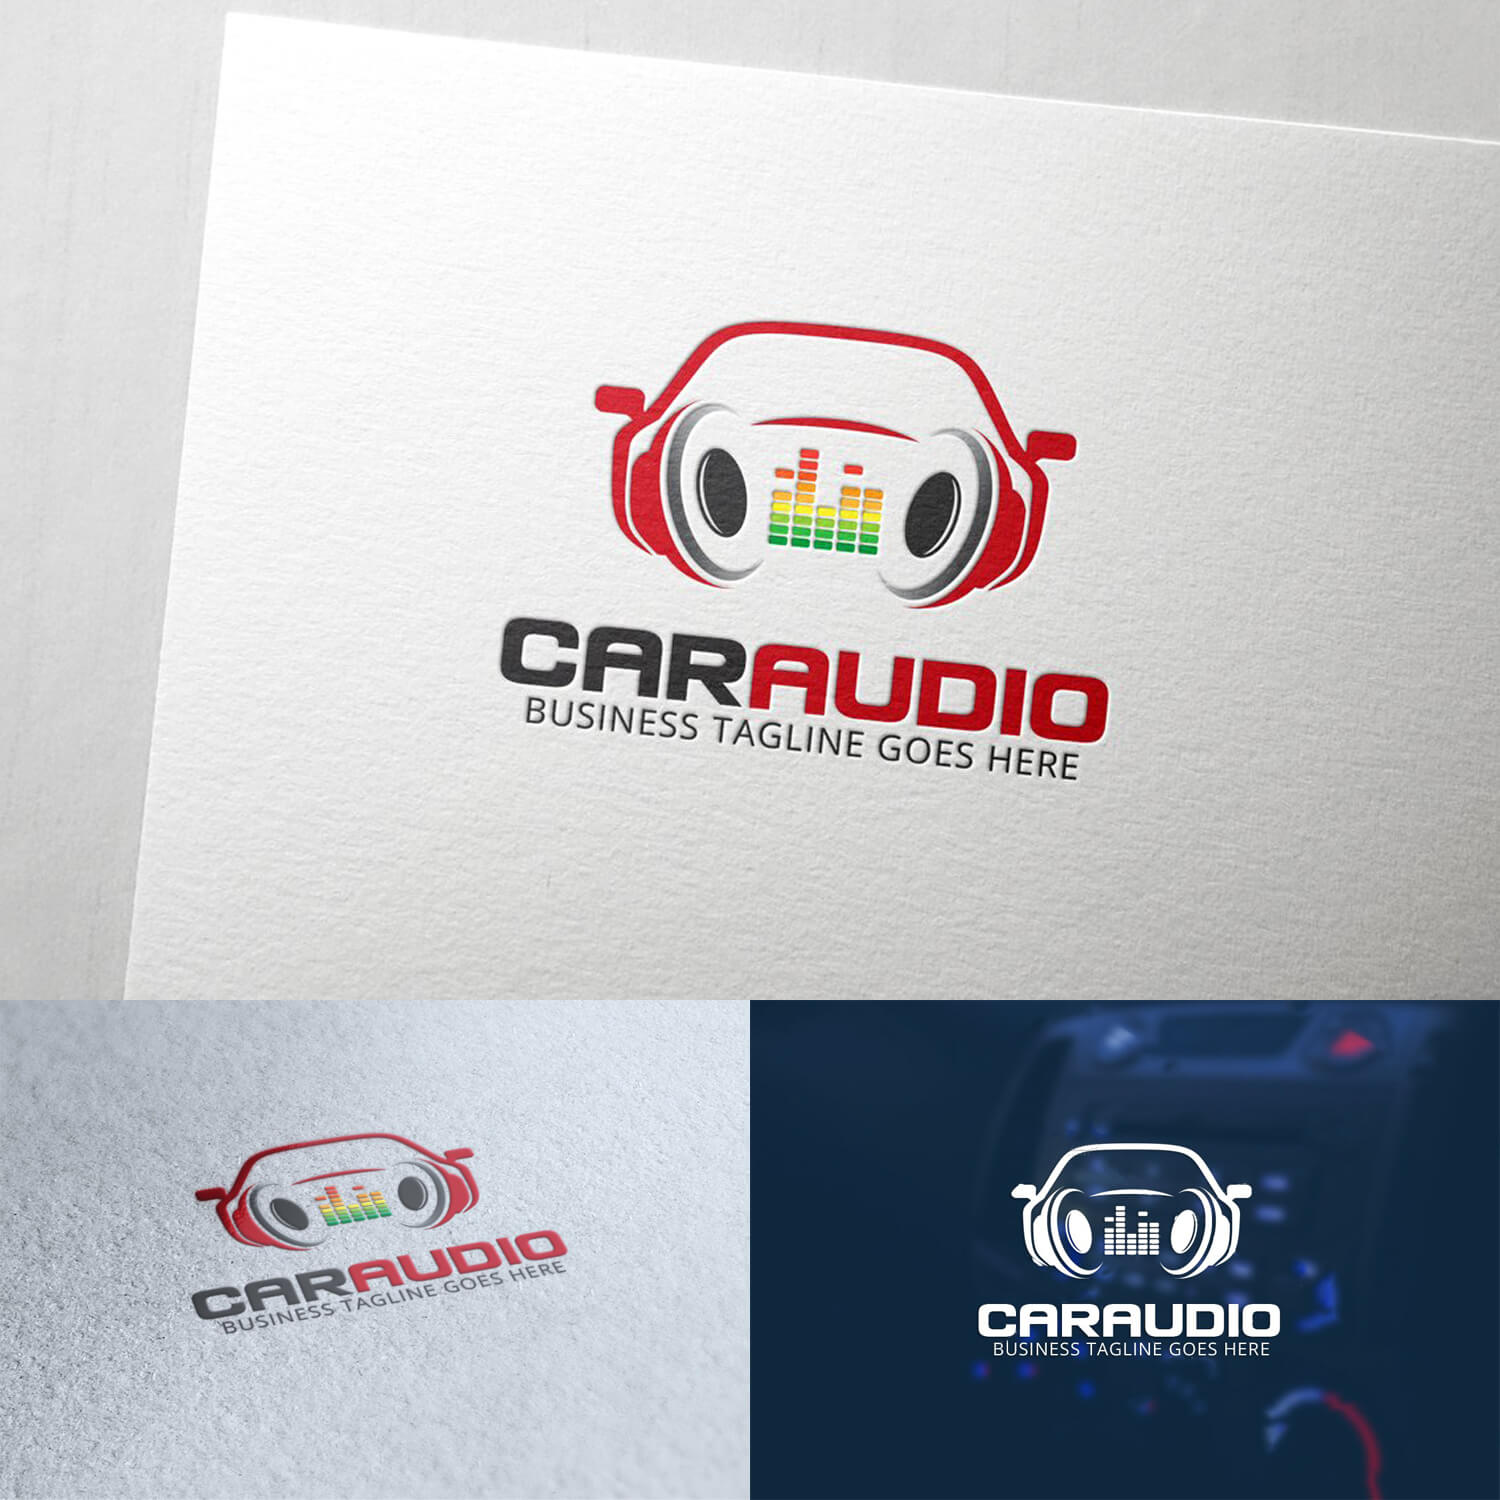 Caraudio logo close-up on colorful backgrounds.